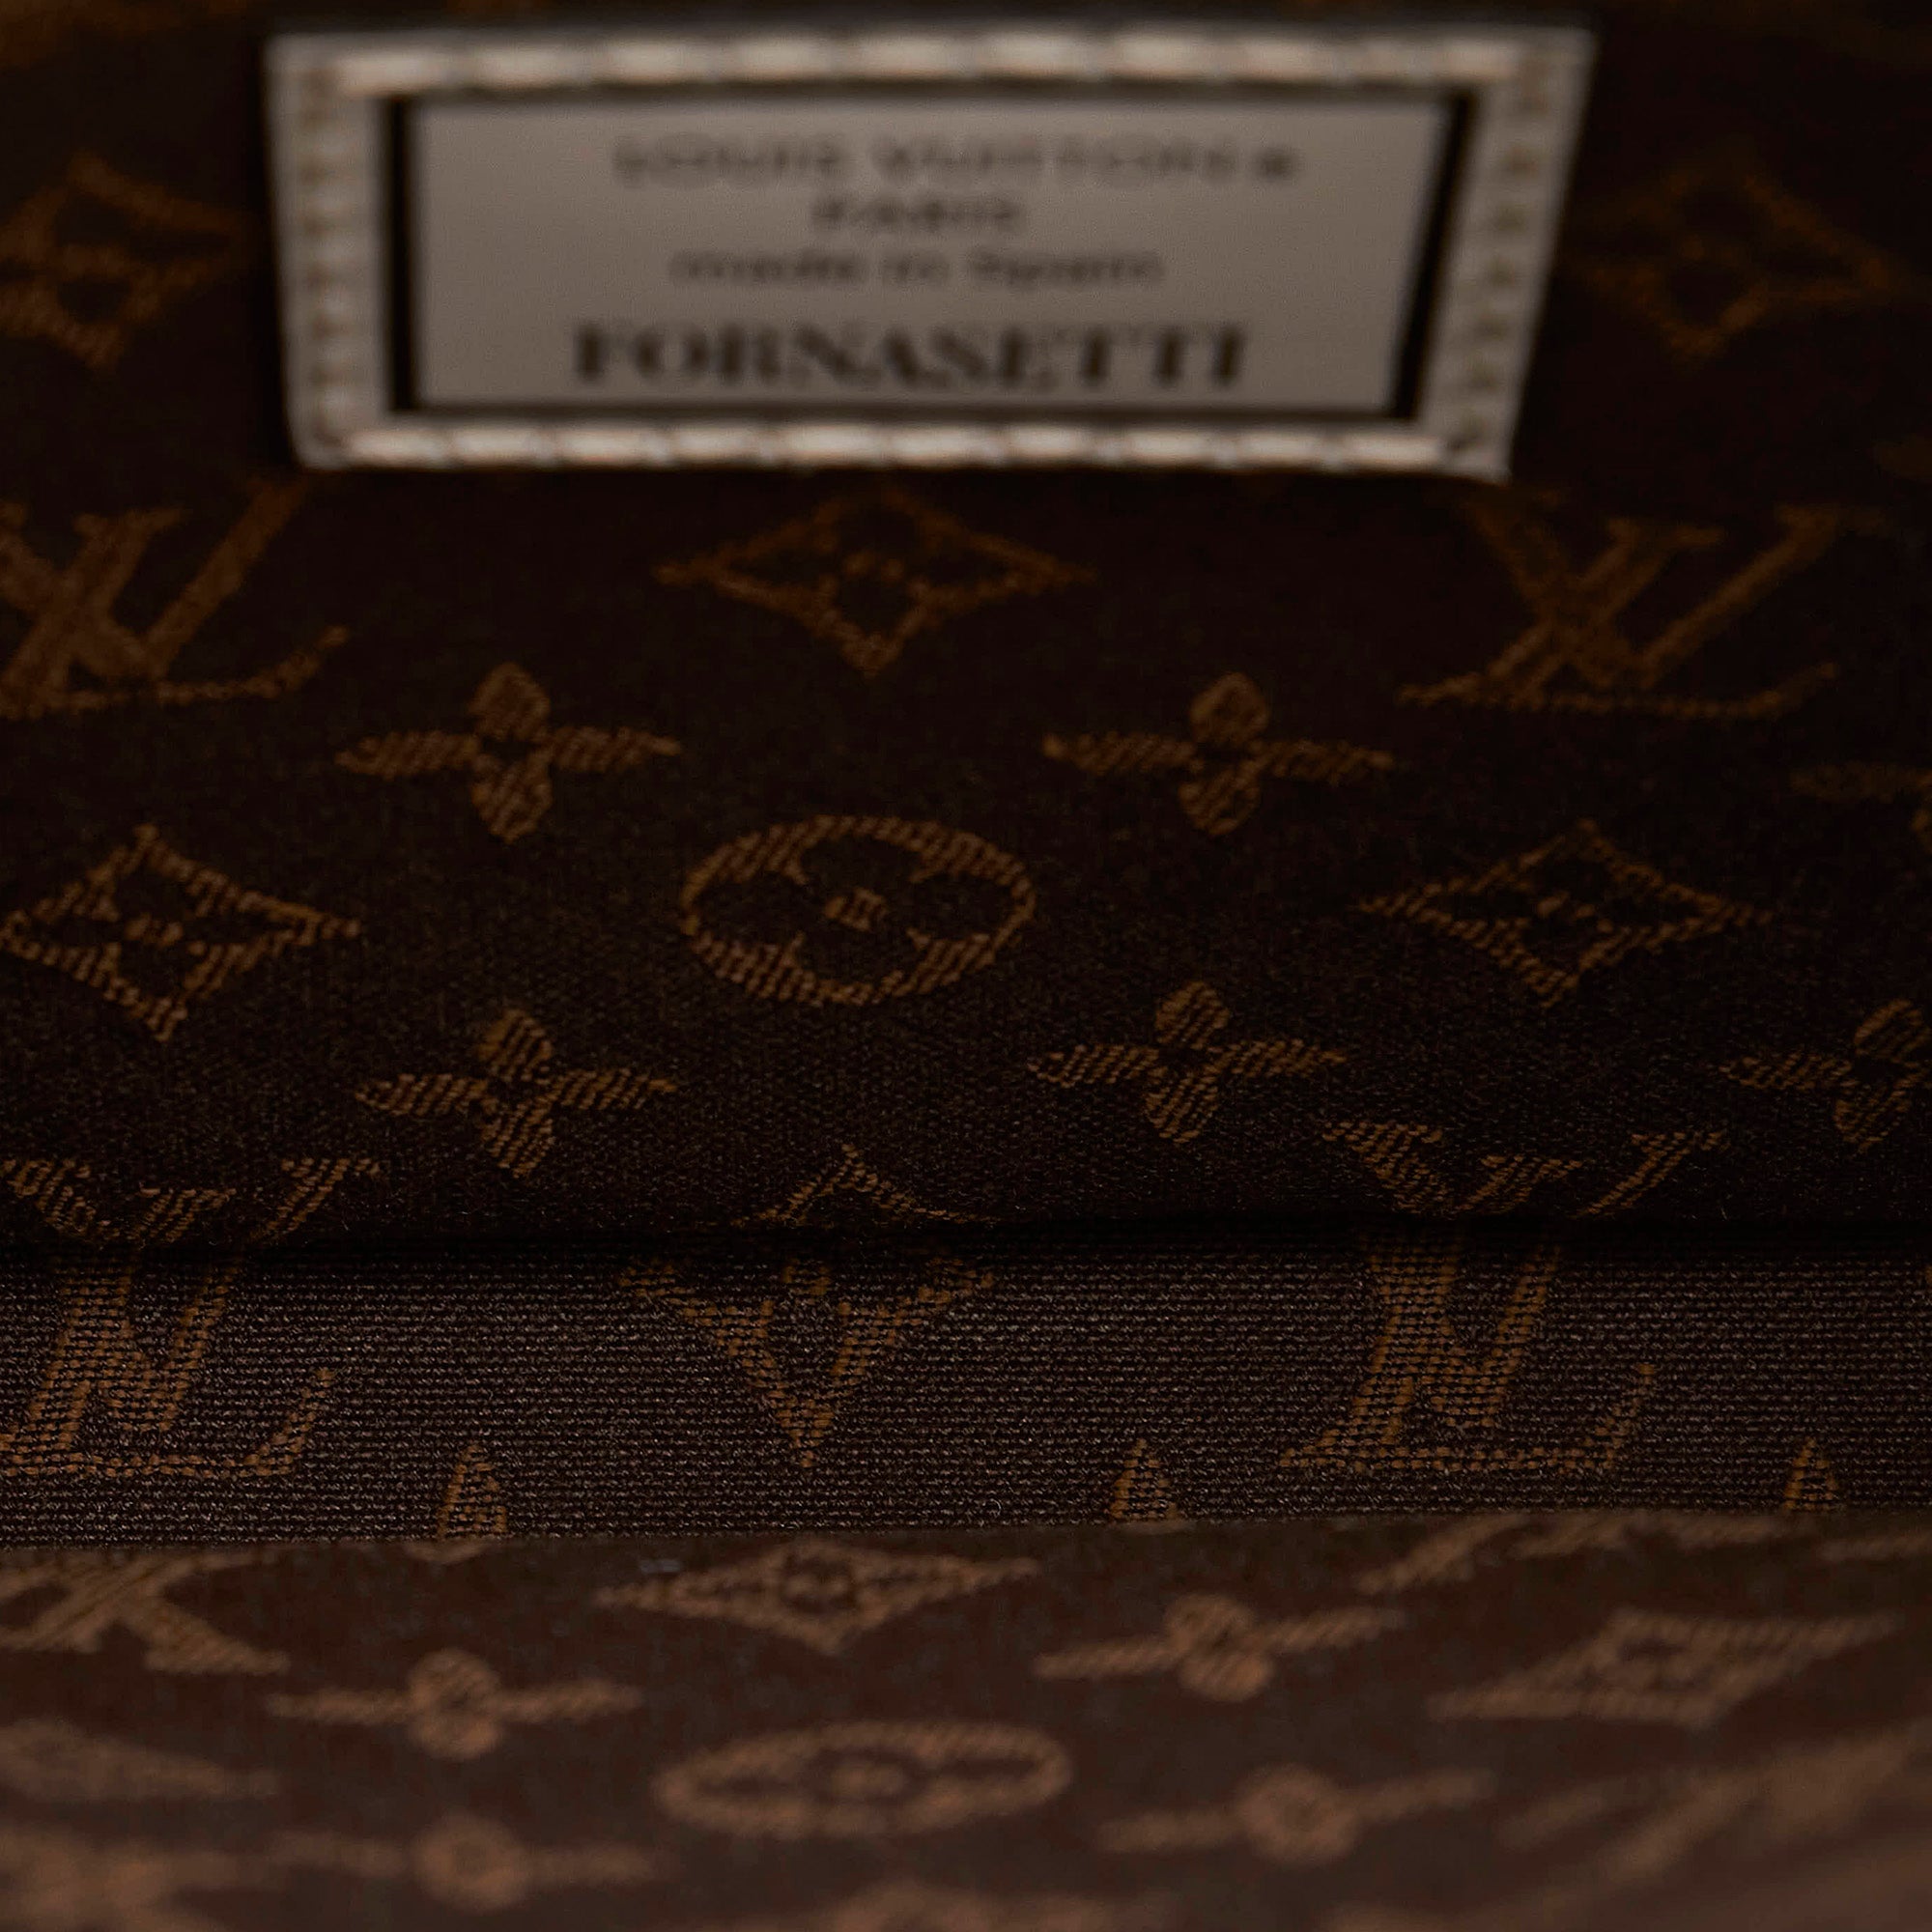 Louis Vuitton Limited Edition Fornasetti Sac Plat Bag